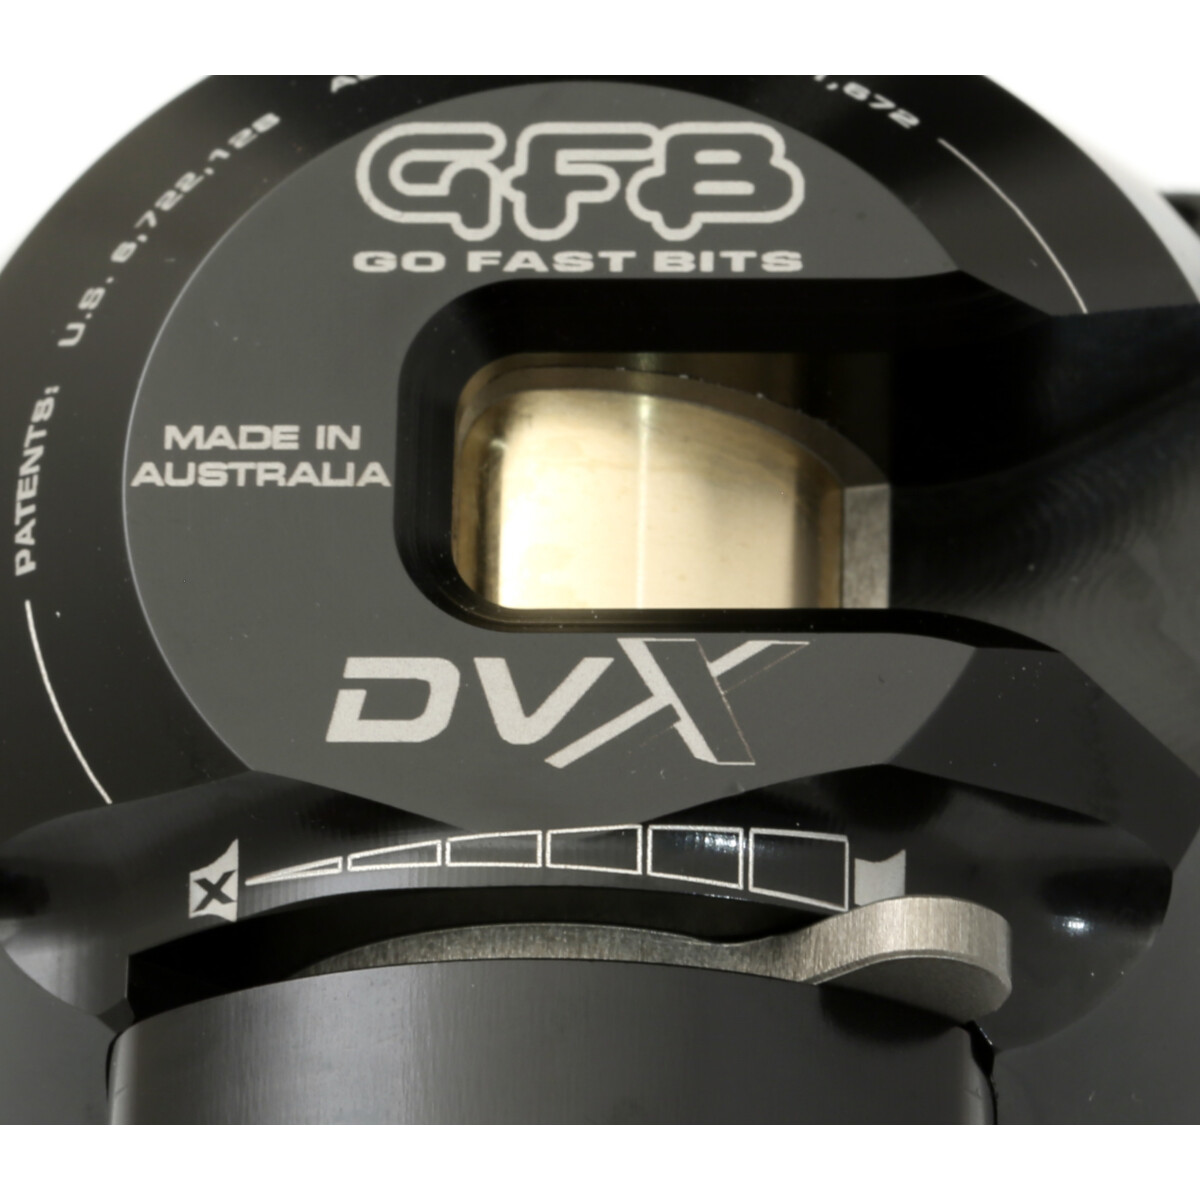 GFB DVX T9661 Adjustable performance diverter with volume control - suits to Hyundai, Veloster, Kia (GFB DV+ T9661)